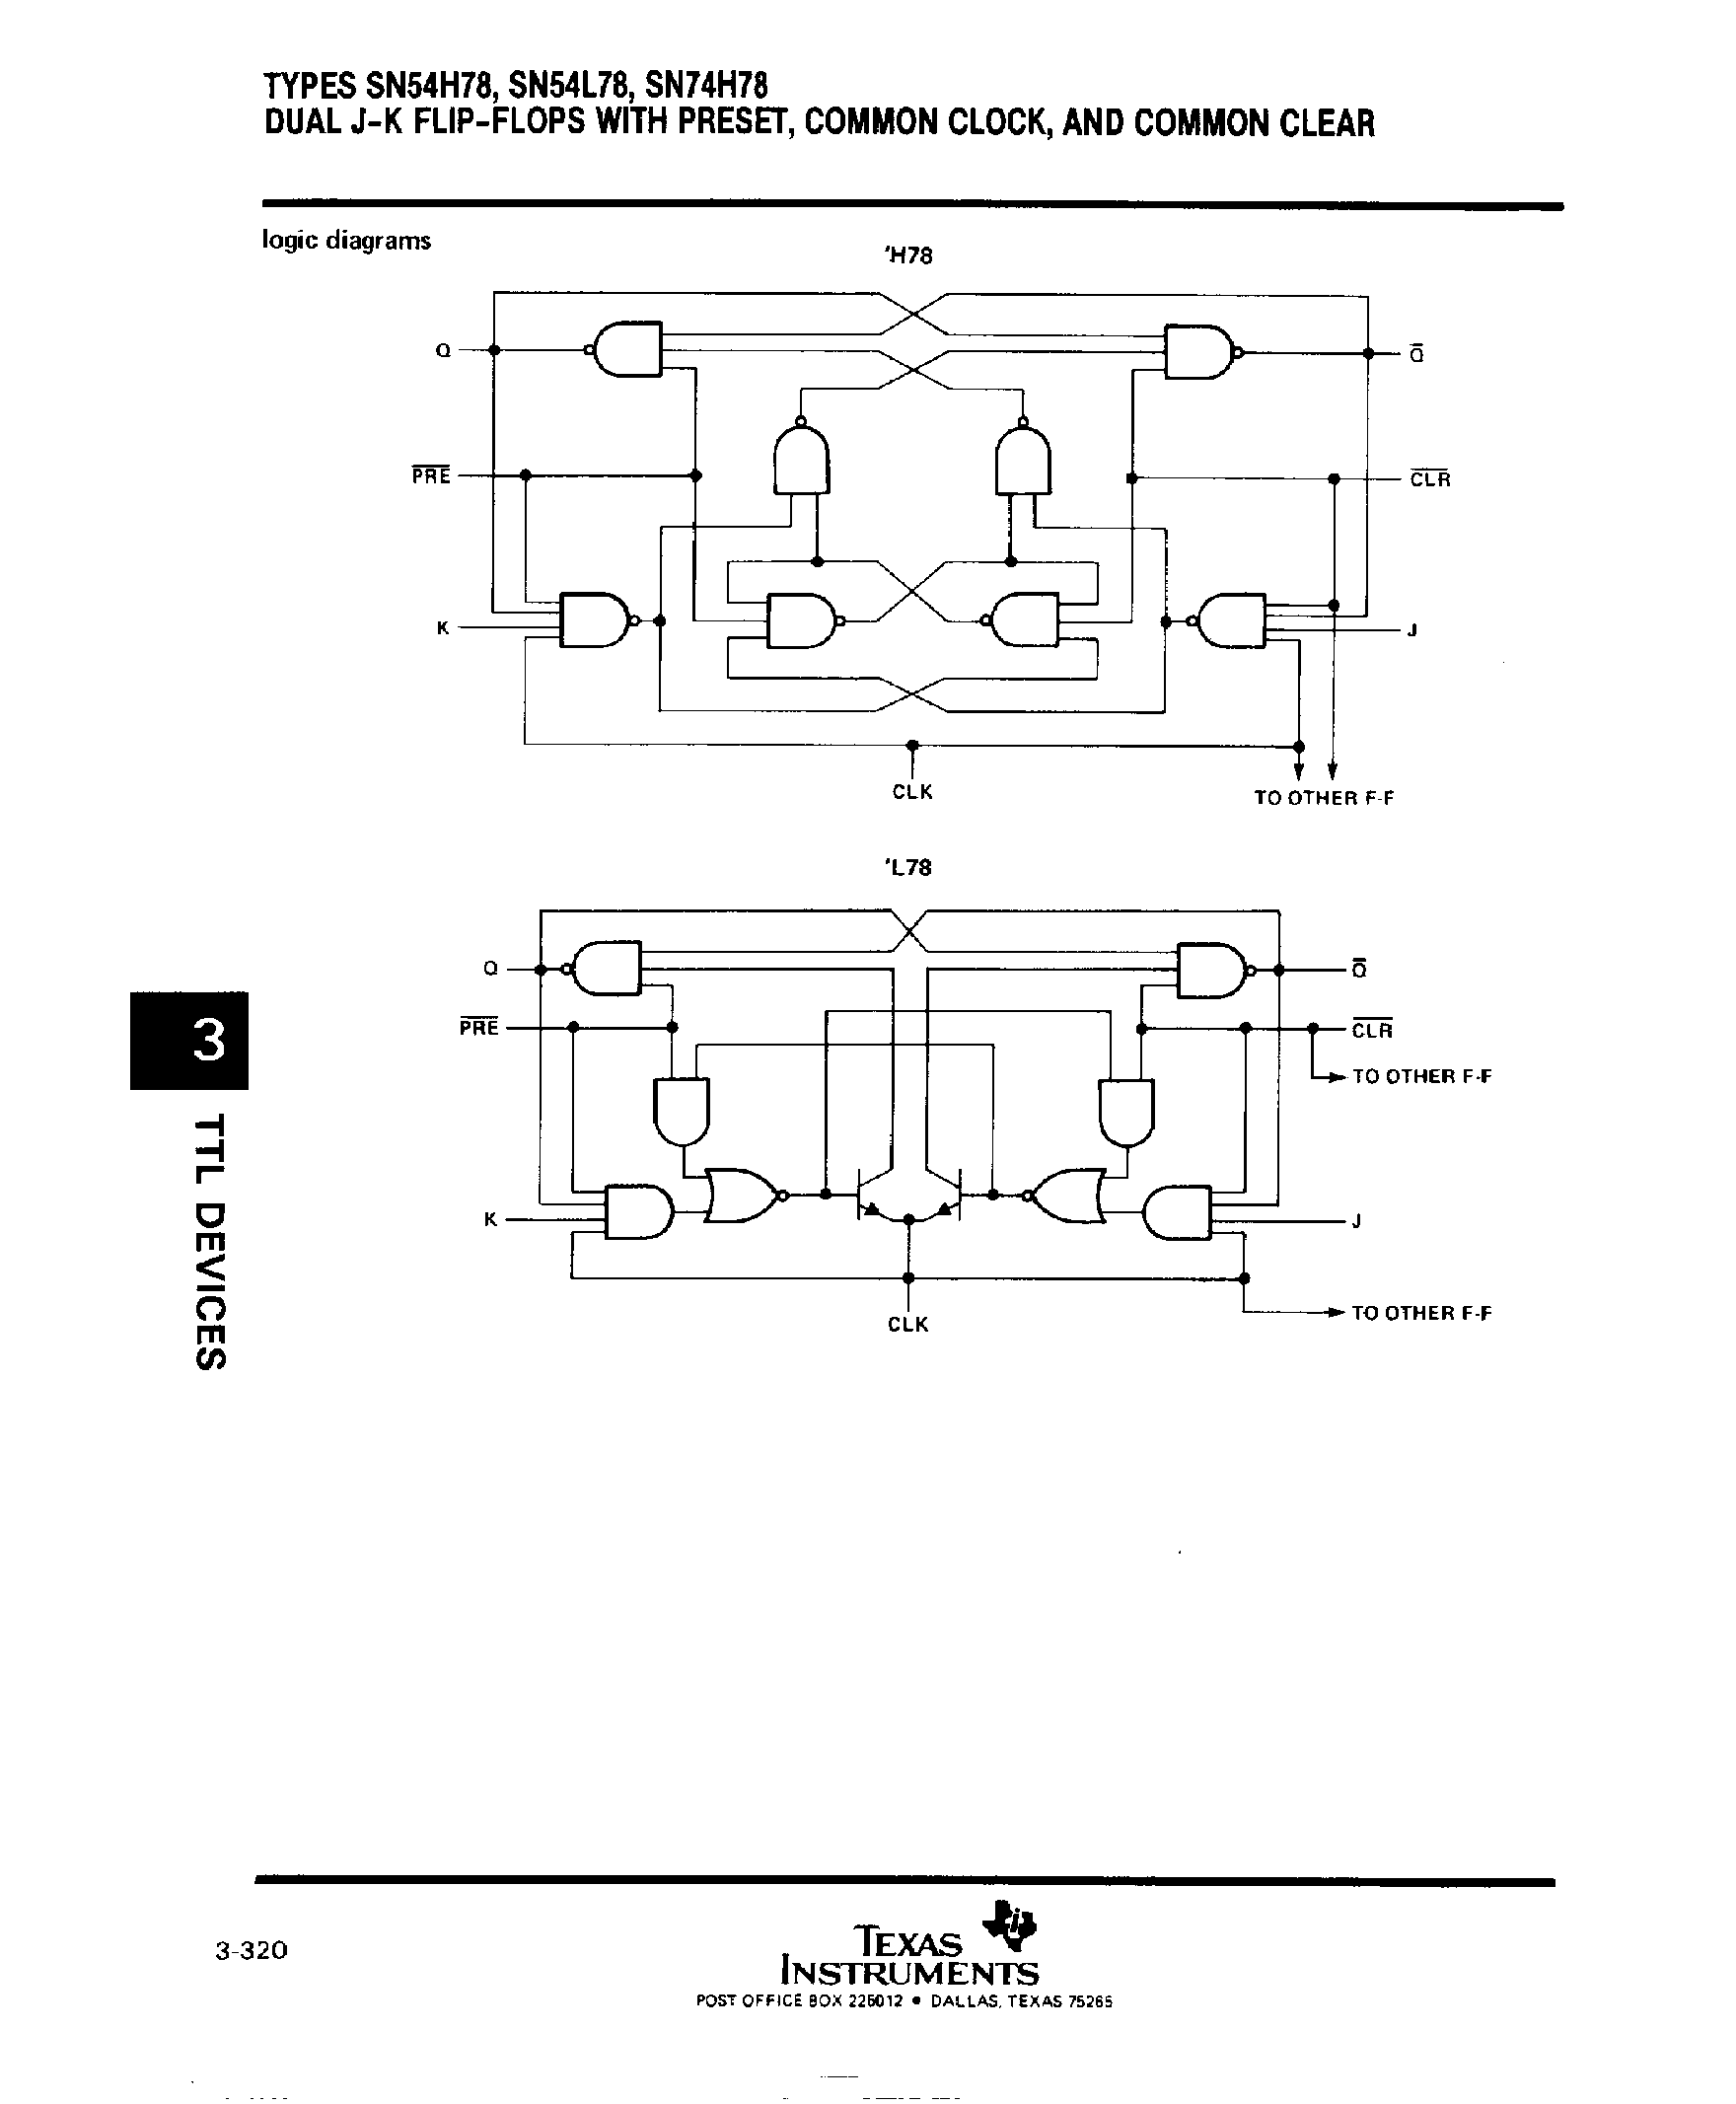 Datasheet SN74H78 - Dual J-K F-F with Preset / Common Clock and Common Clear page 2